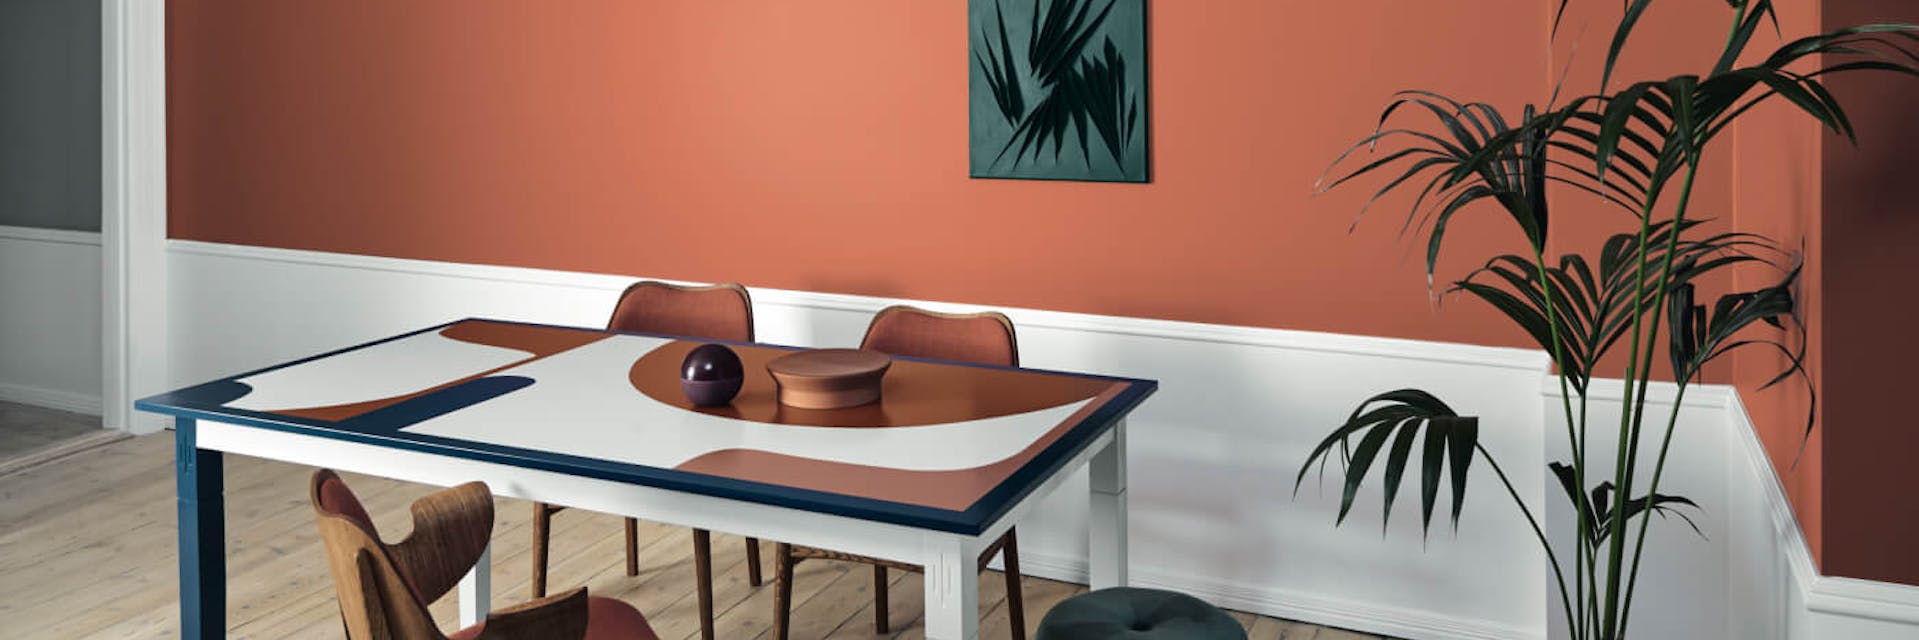 Orange interiors offer visual excitement and a positive appearance in equal measure.